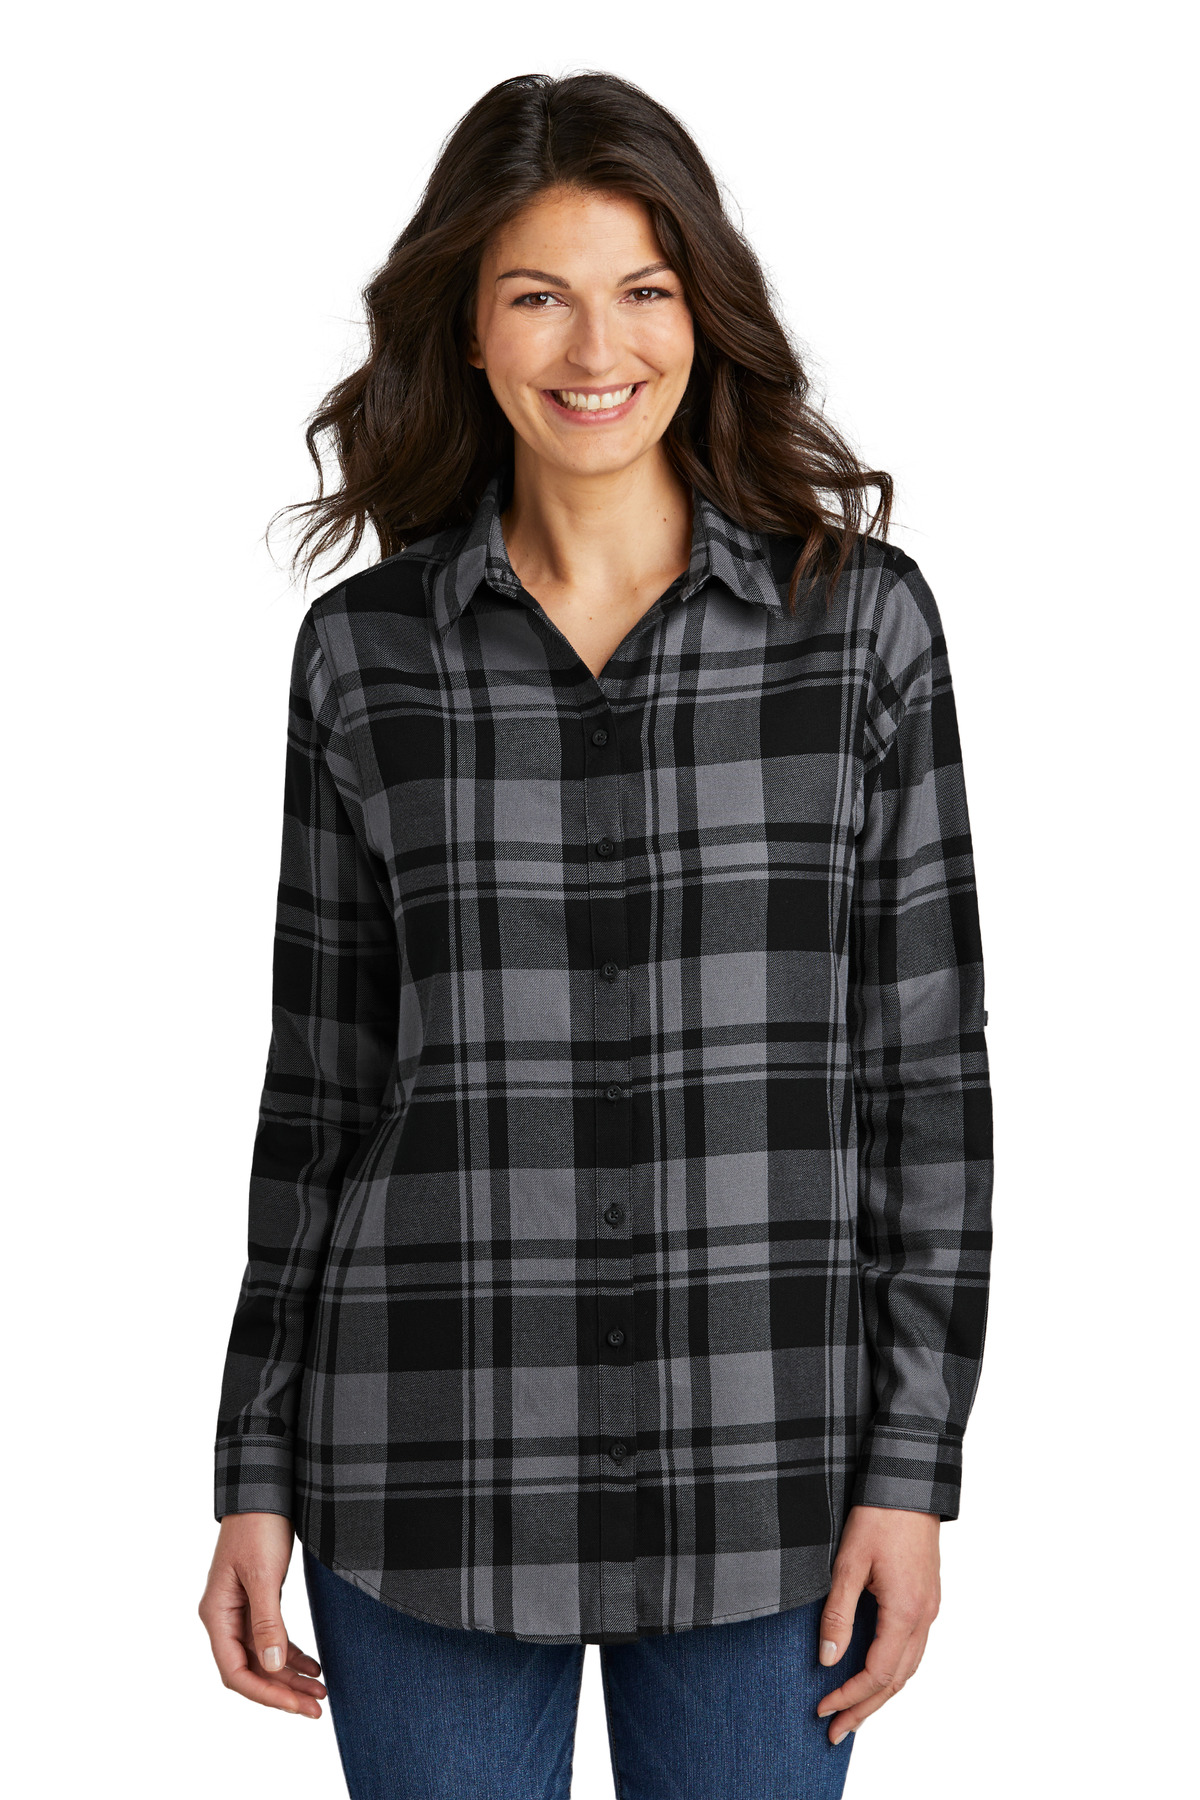 Port Authority Ladies Woven Shirts for Hospitality- ® Ladies Plaid Flannel Tunic .-Port Authority